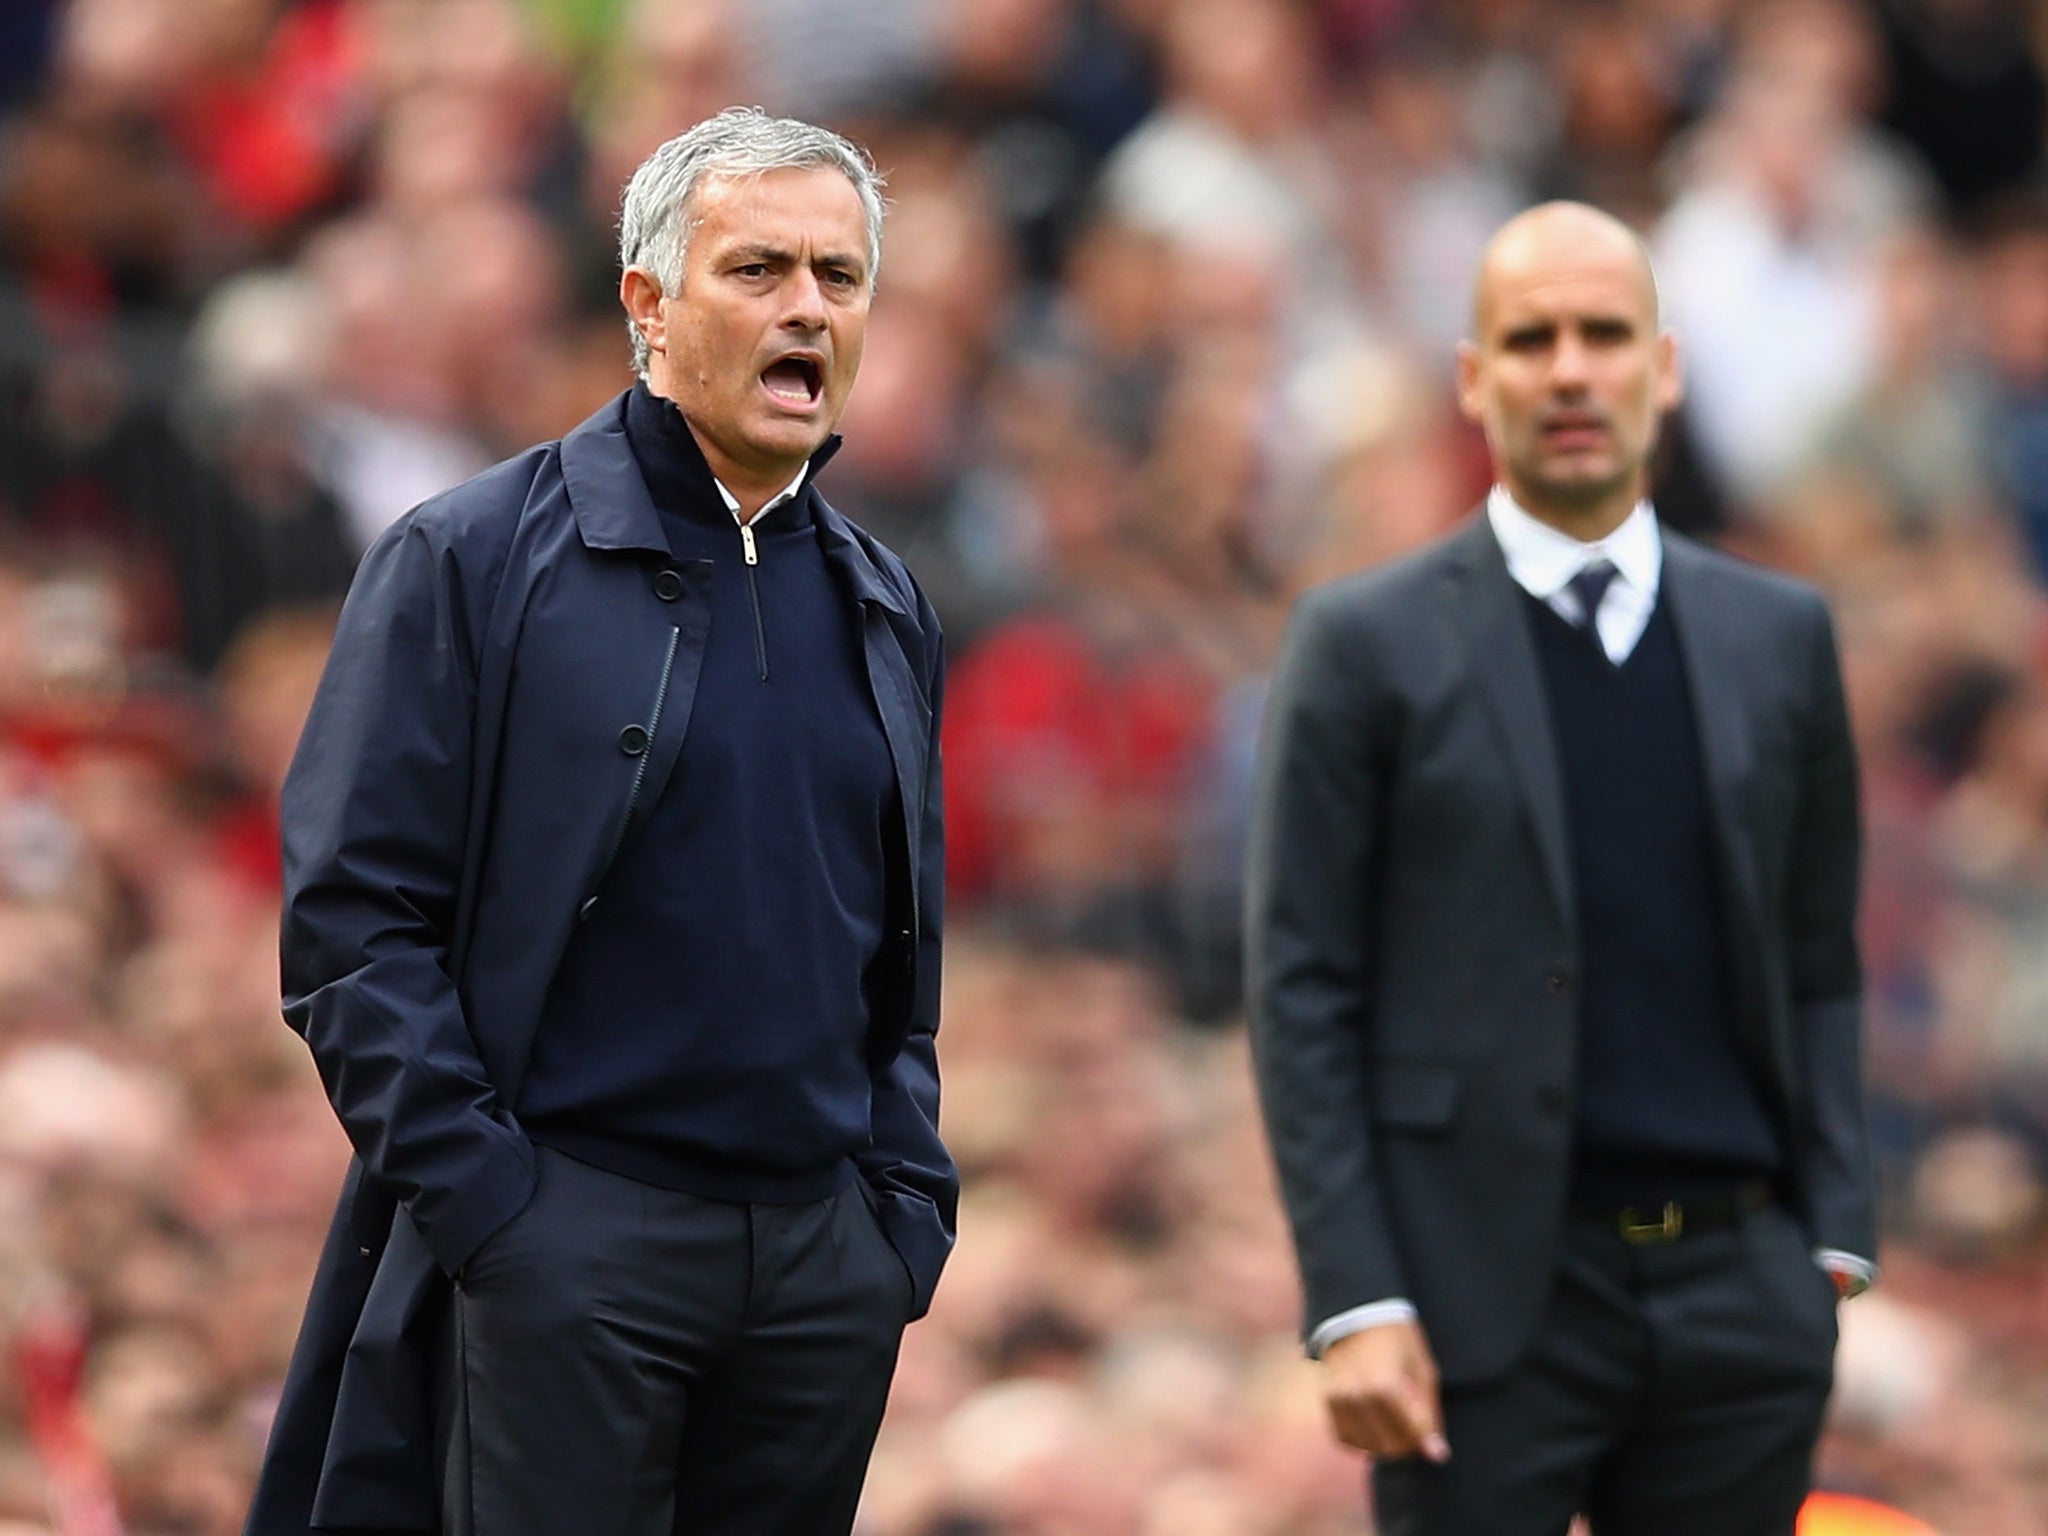 Mourinho and Guardiola renewed acquaintances at Old Trafford in September